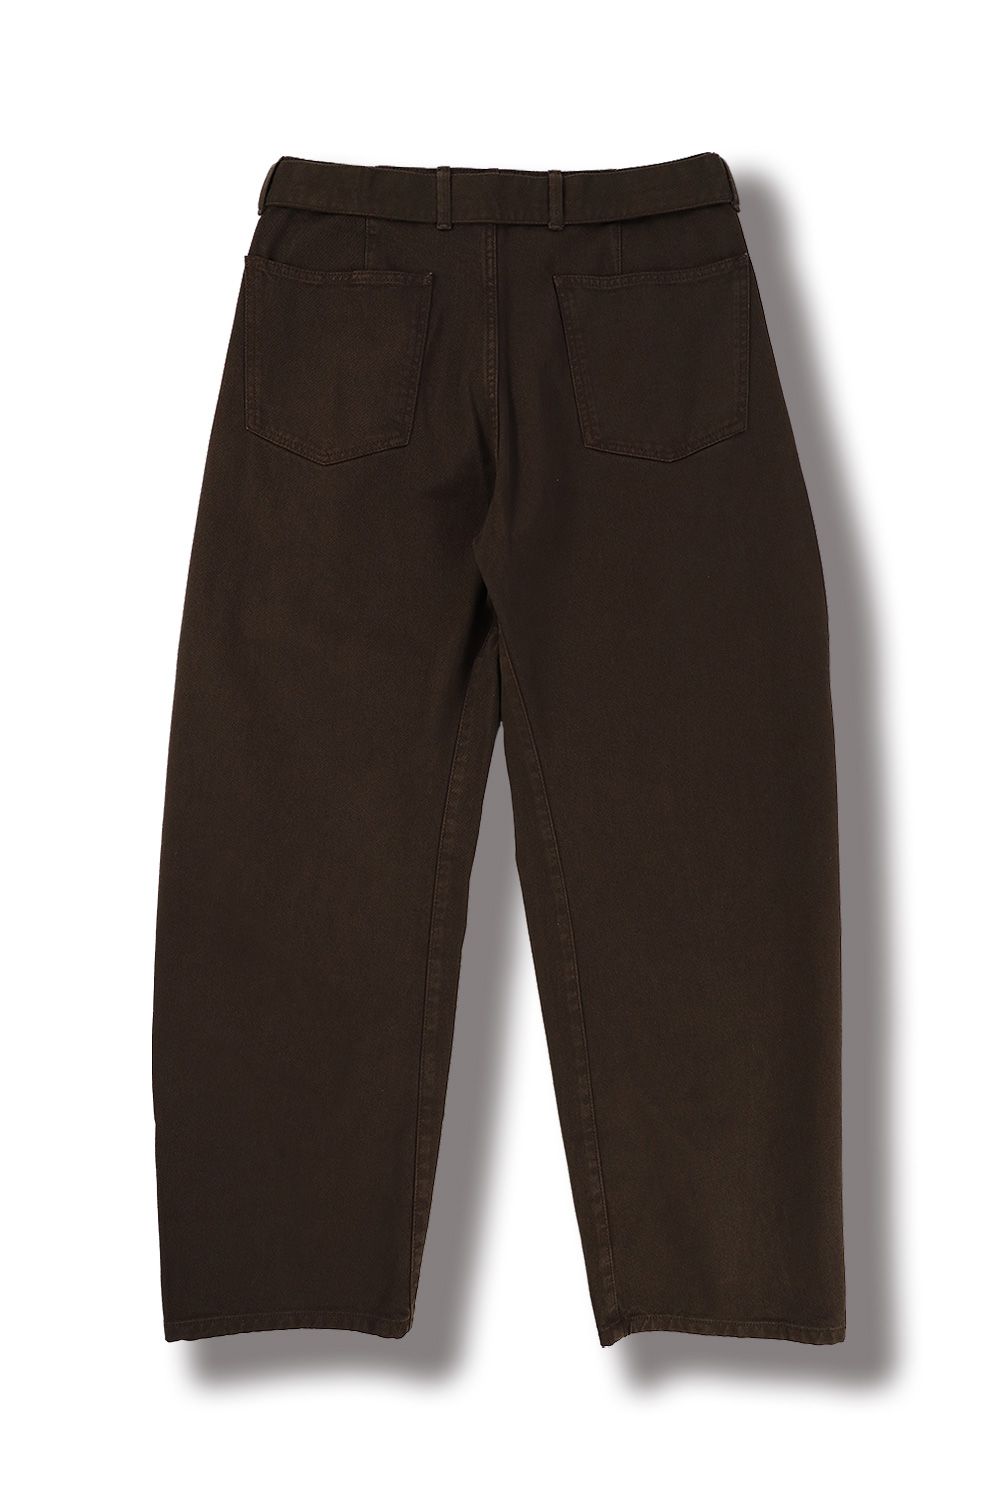 LEMAIRE - 【23AW】TWISTED BELTED PANTS(ESPRESSO